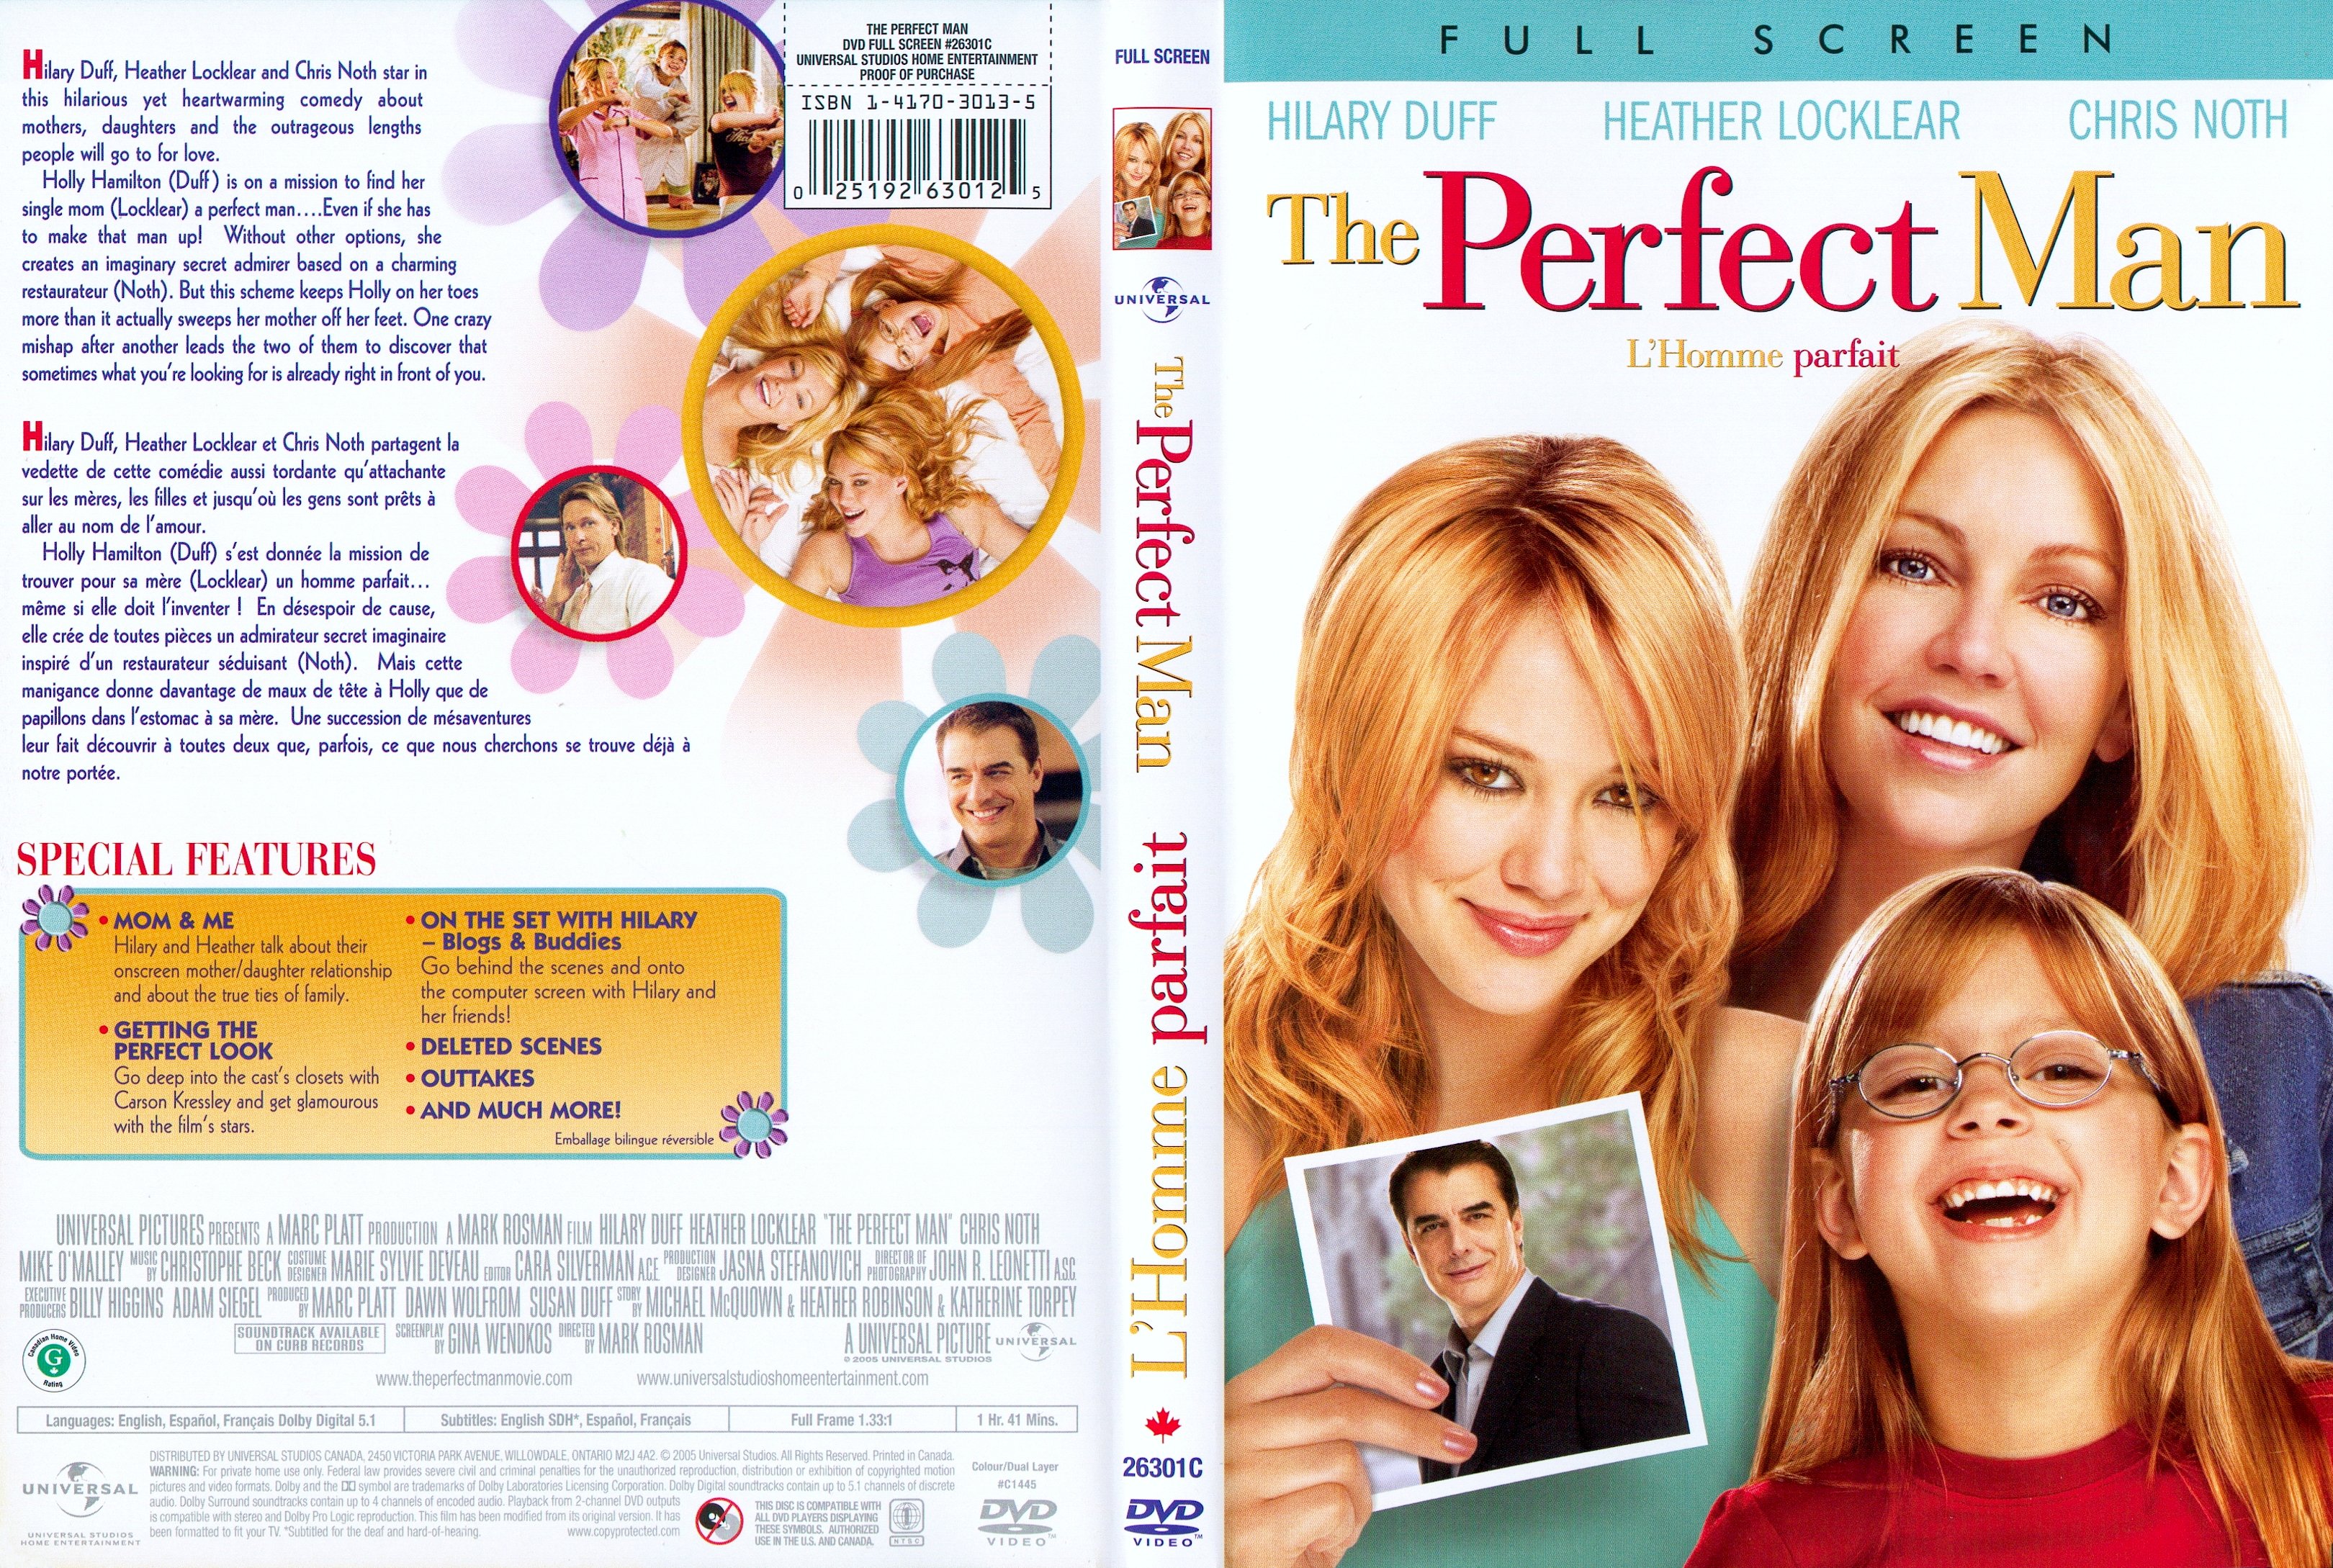 Jaquette DVD The perfect man